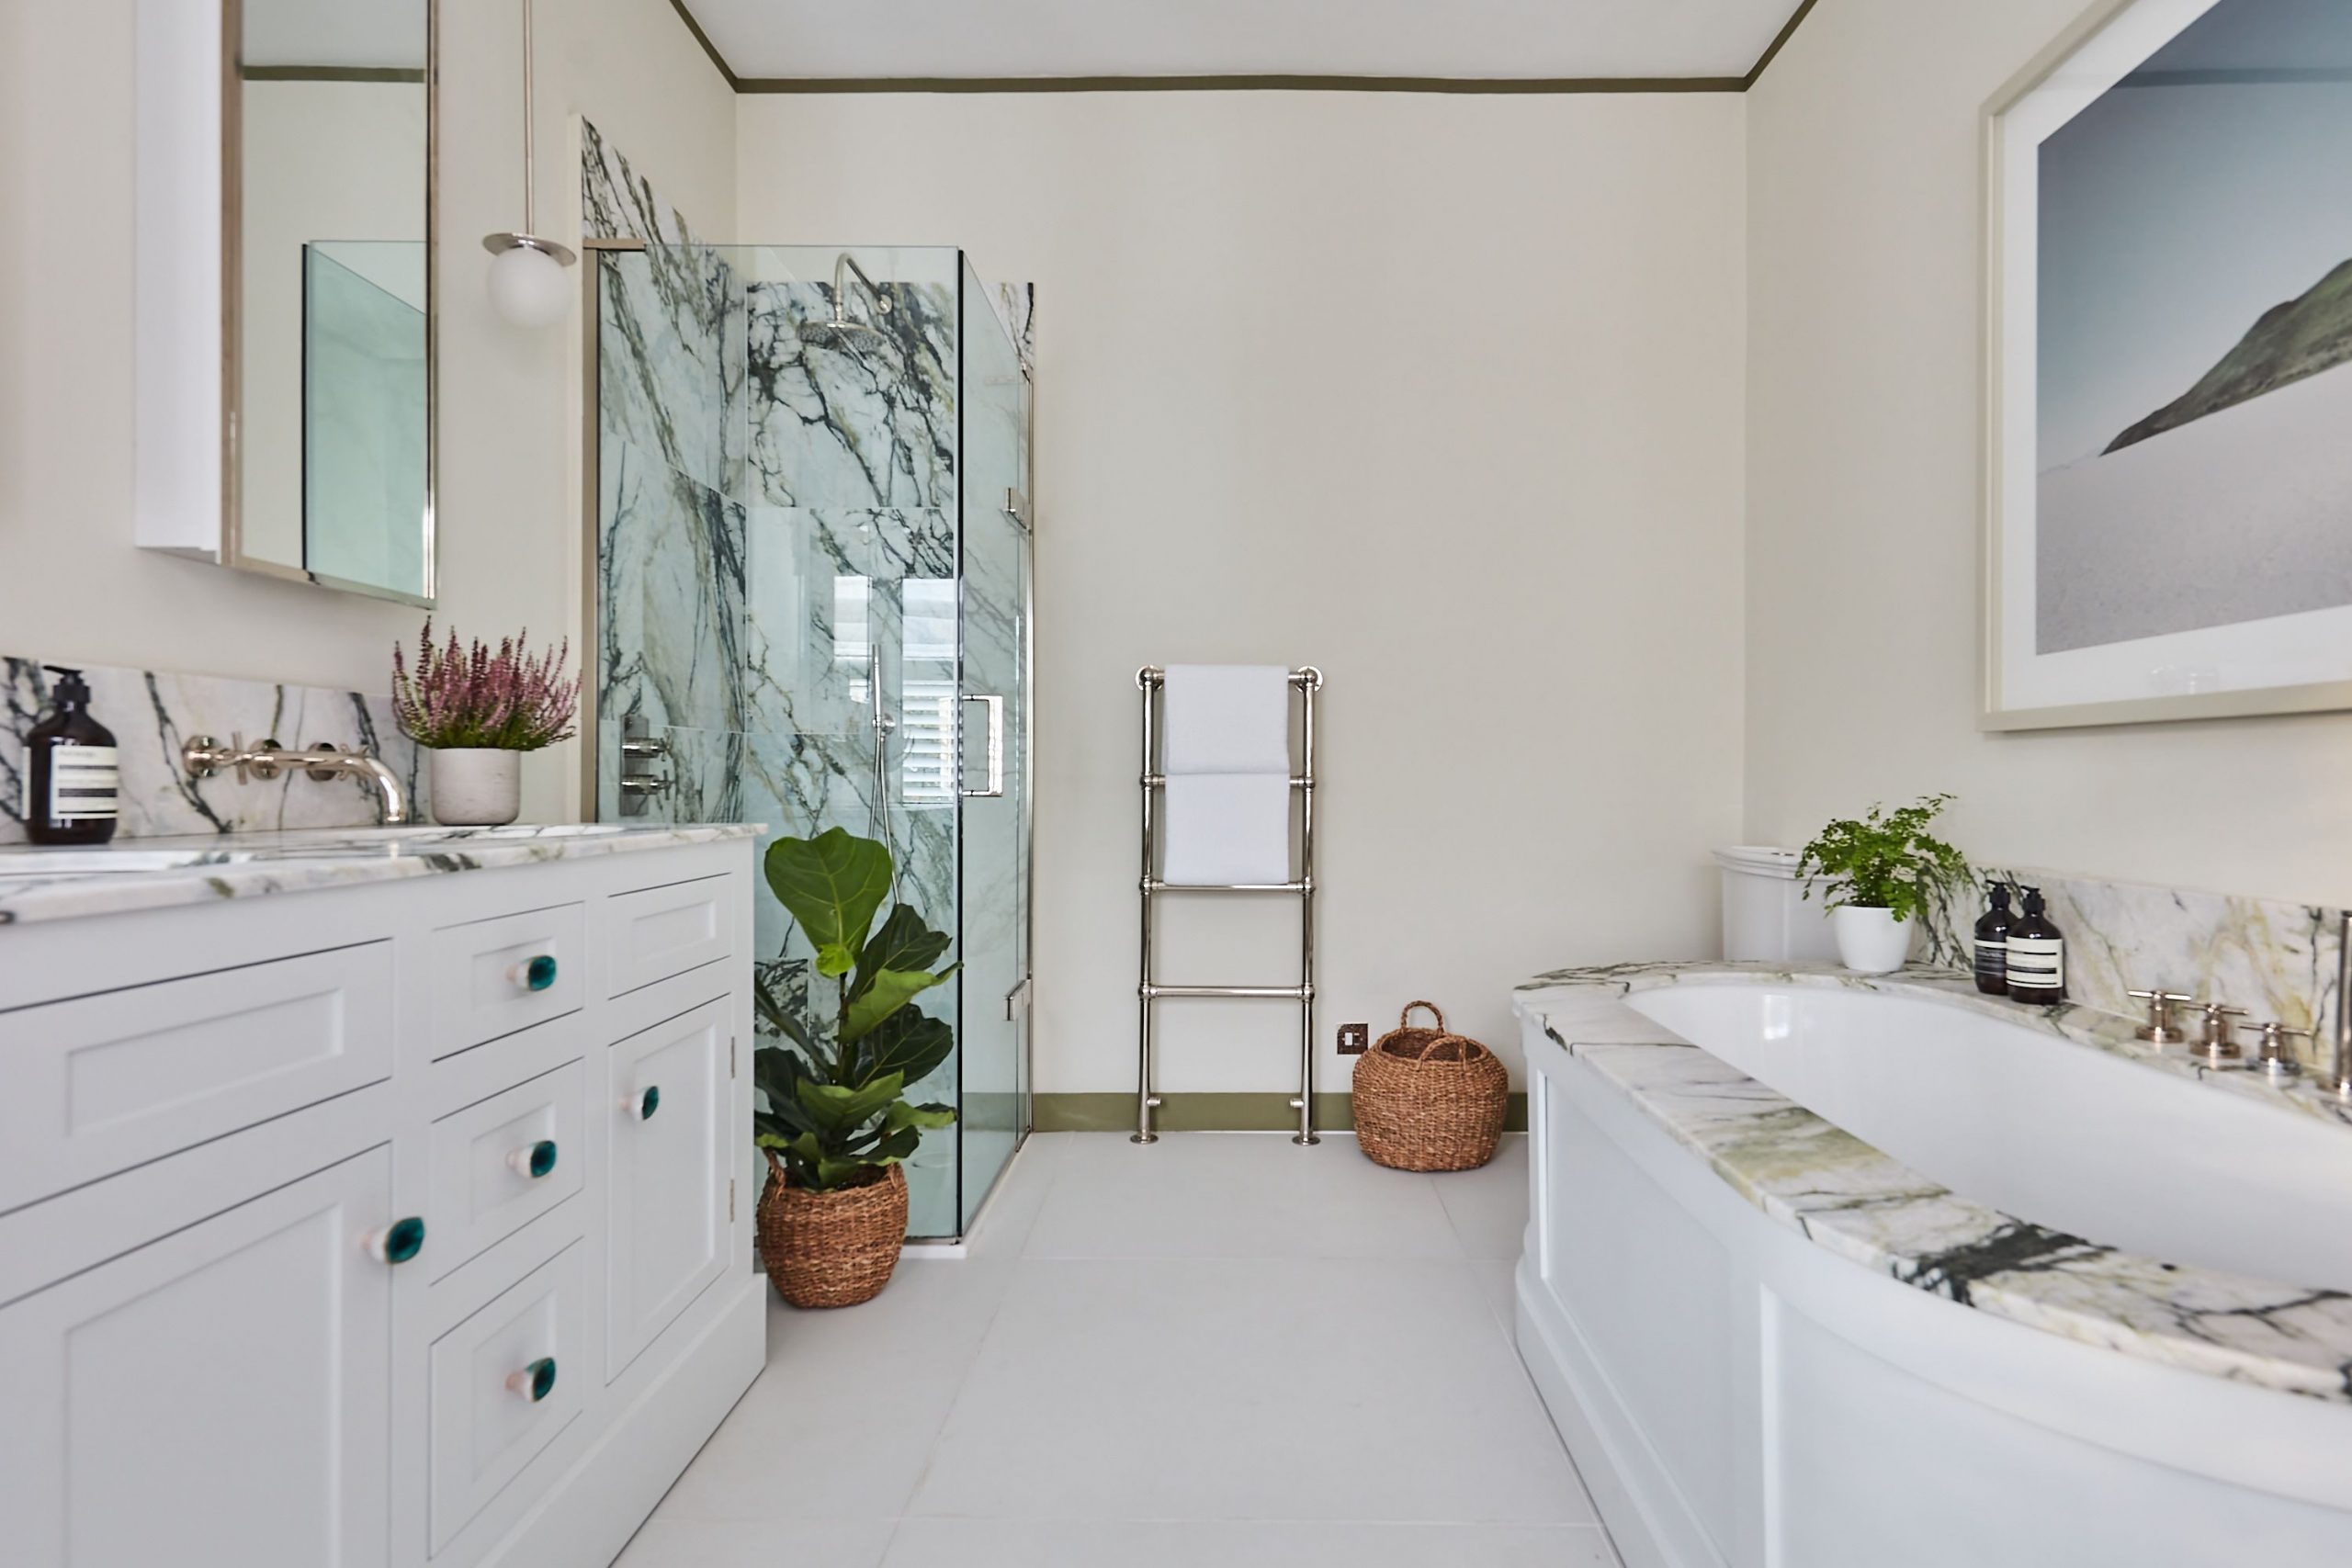 5 Bathroom Vanity Trends You Need to Know About